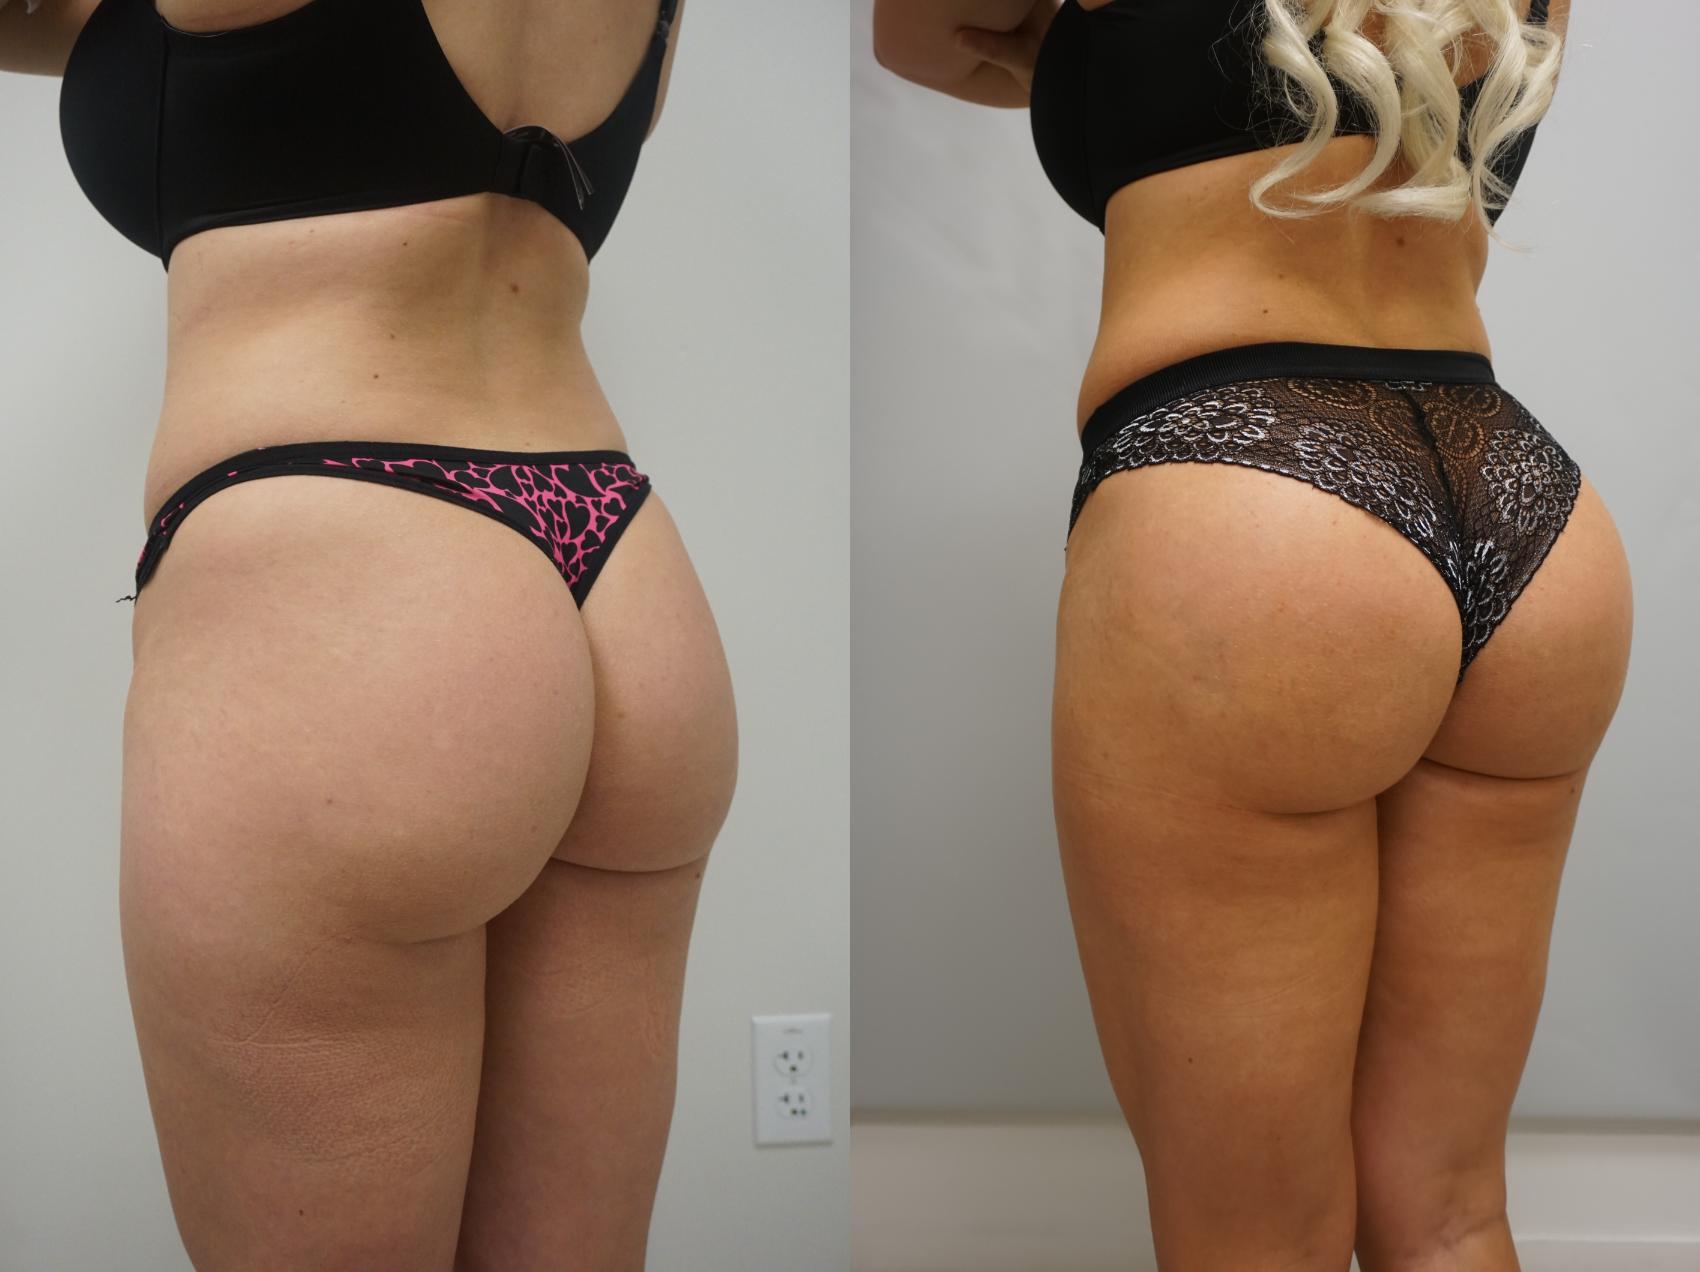 Will A Lower Buttock Lift Make My Buttocks Look Flat Or Square-Shaped? -  Plastic Surgeon